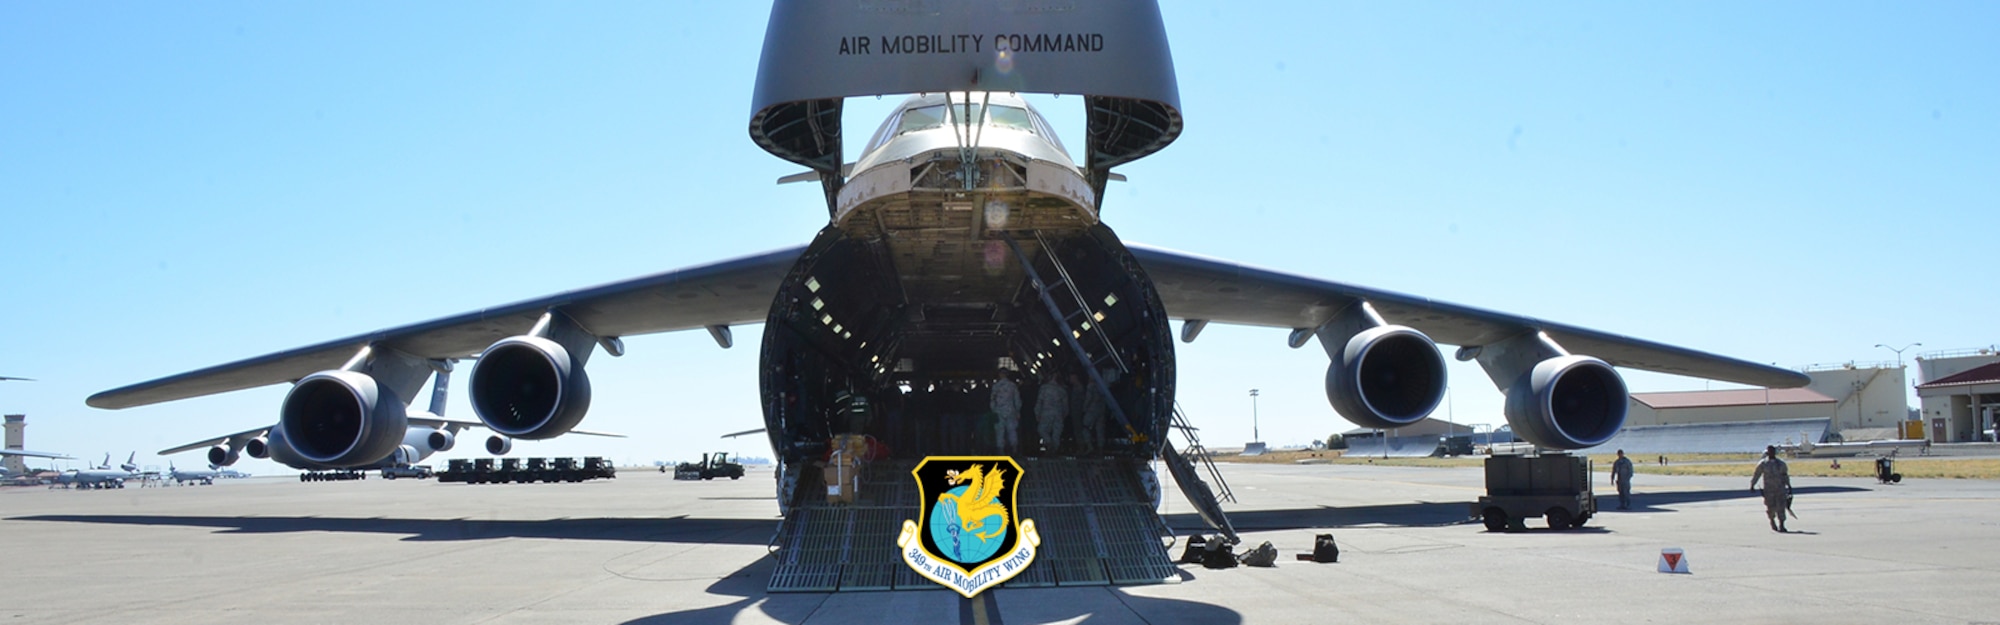 A C-5M Super Galaxy sits with its nose open on the flightline July 15, 2018 at Travis Air Force Base, Calif. The trainees of the Development and Training Flight toured the aircraft to become familiarized with the 349th Air Mobility Wing’s mission. (U.S. Air Force photo by Tech. Sgt. Christopher Carranza/Released)